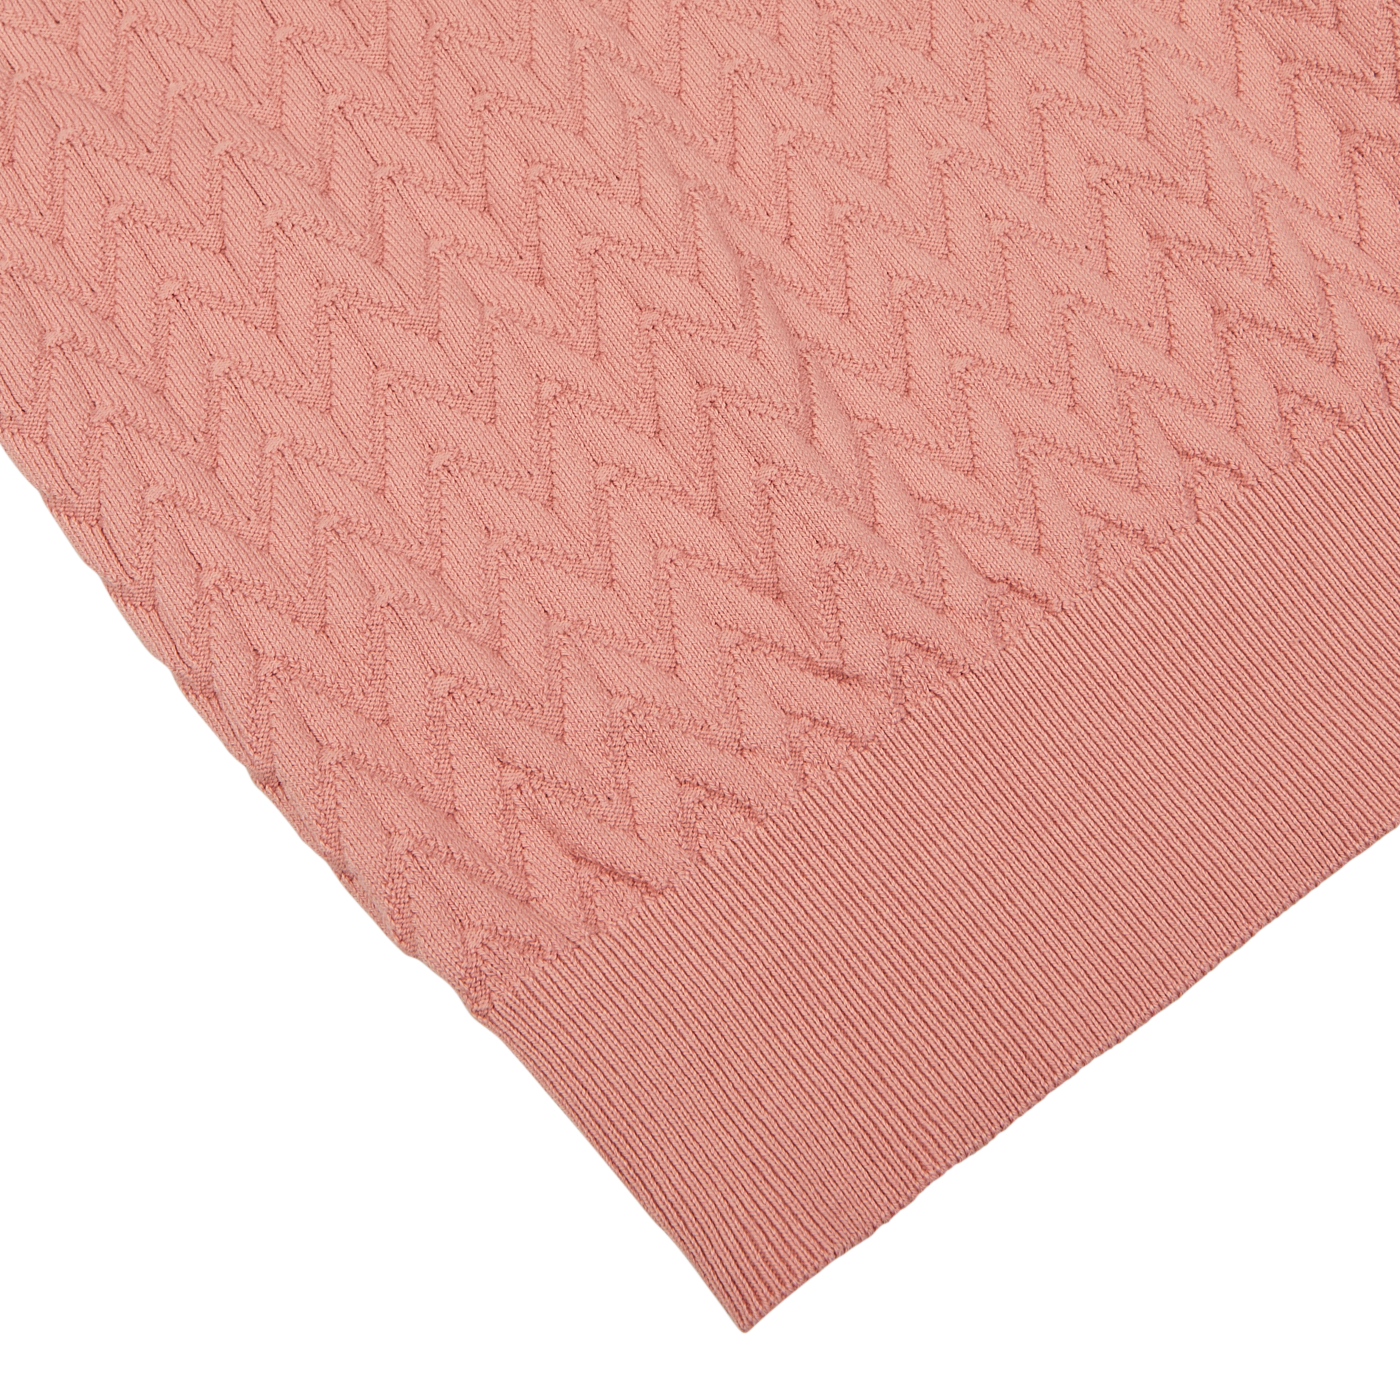 Close-up of a Muted Pink Cotton Capri Collar Polo Shirt by Altea with a chevronne knit pattern on top and a ribbed texture below.